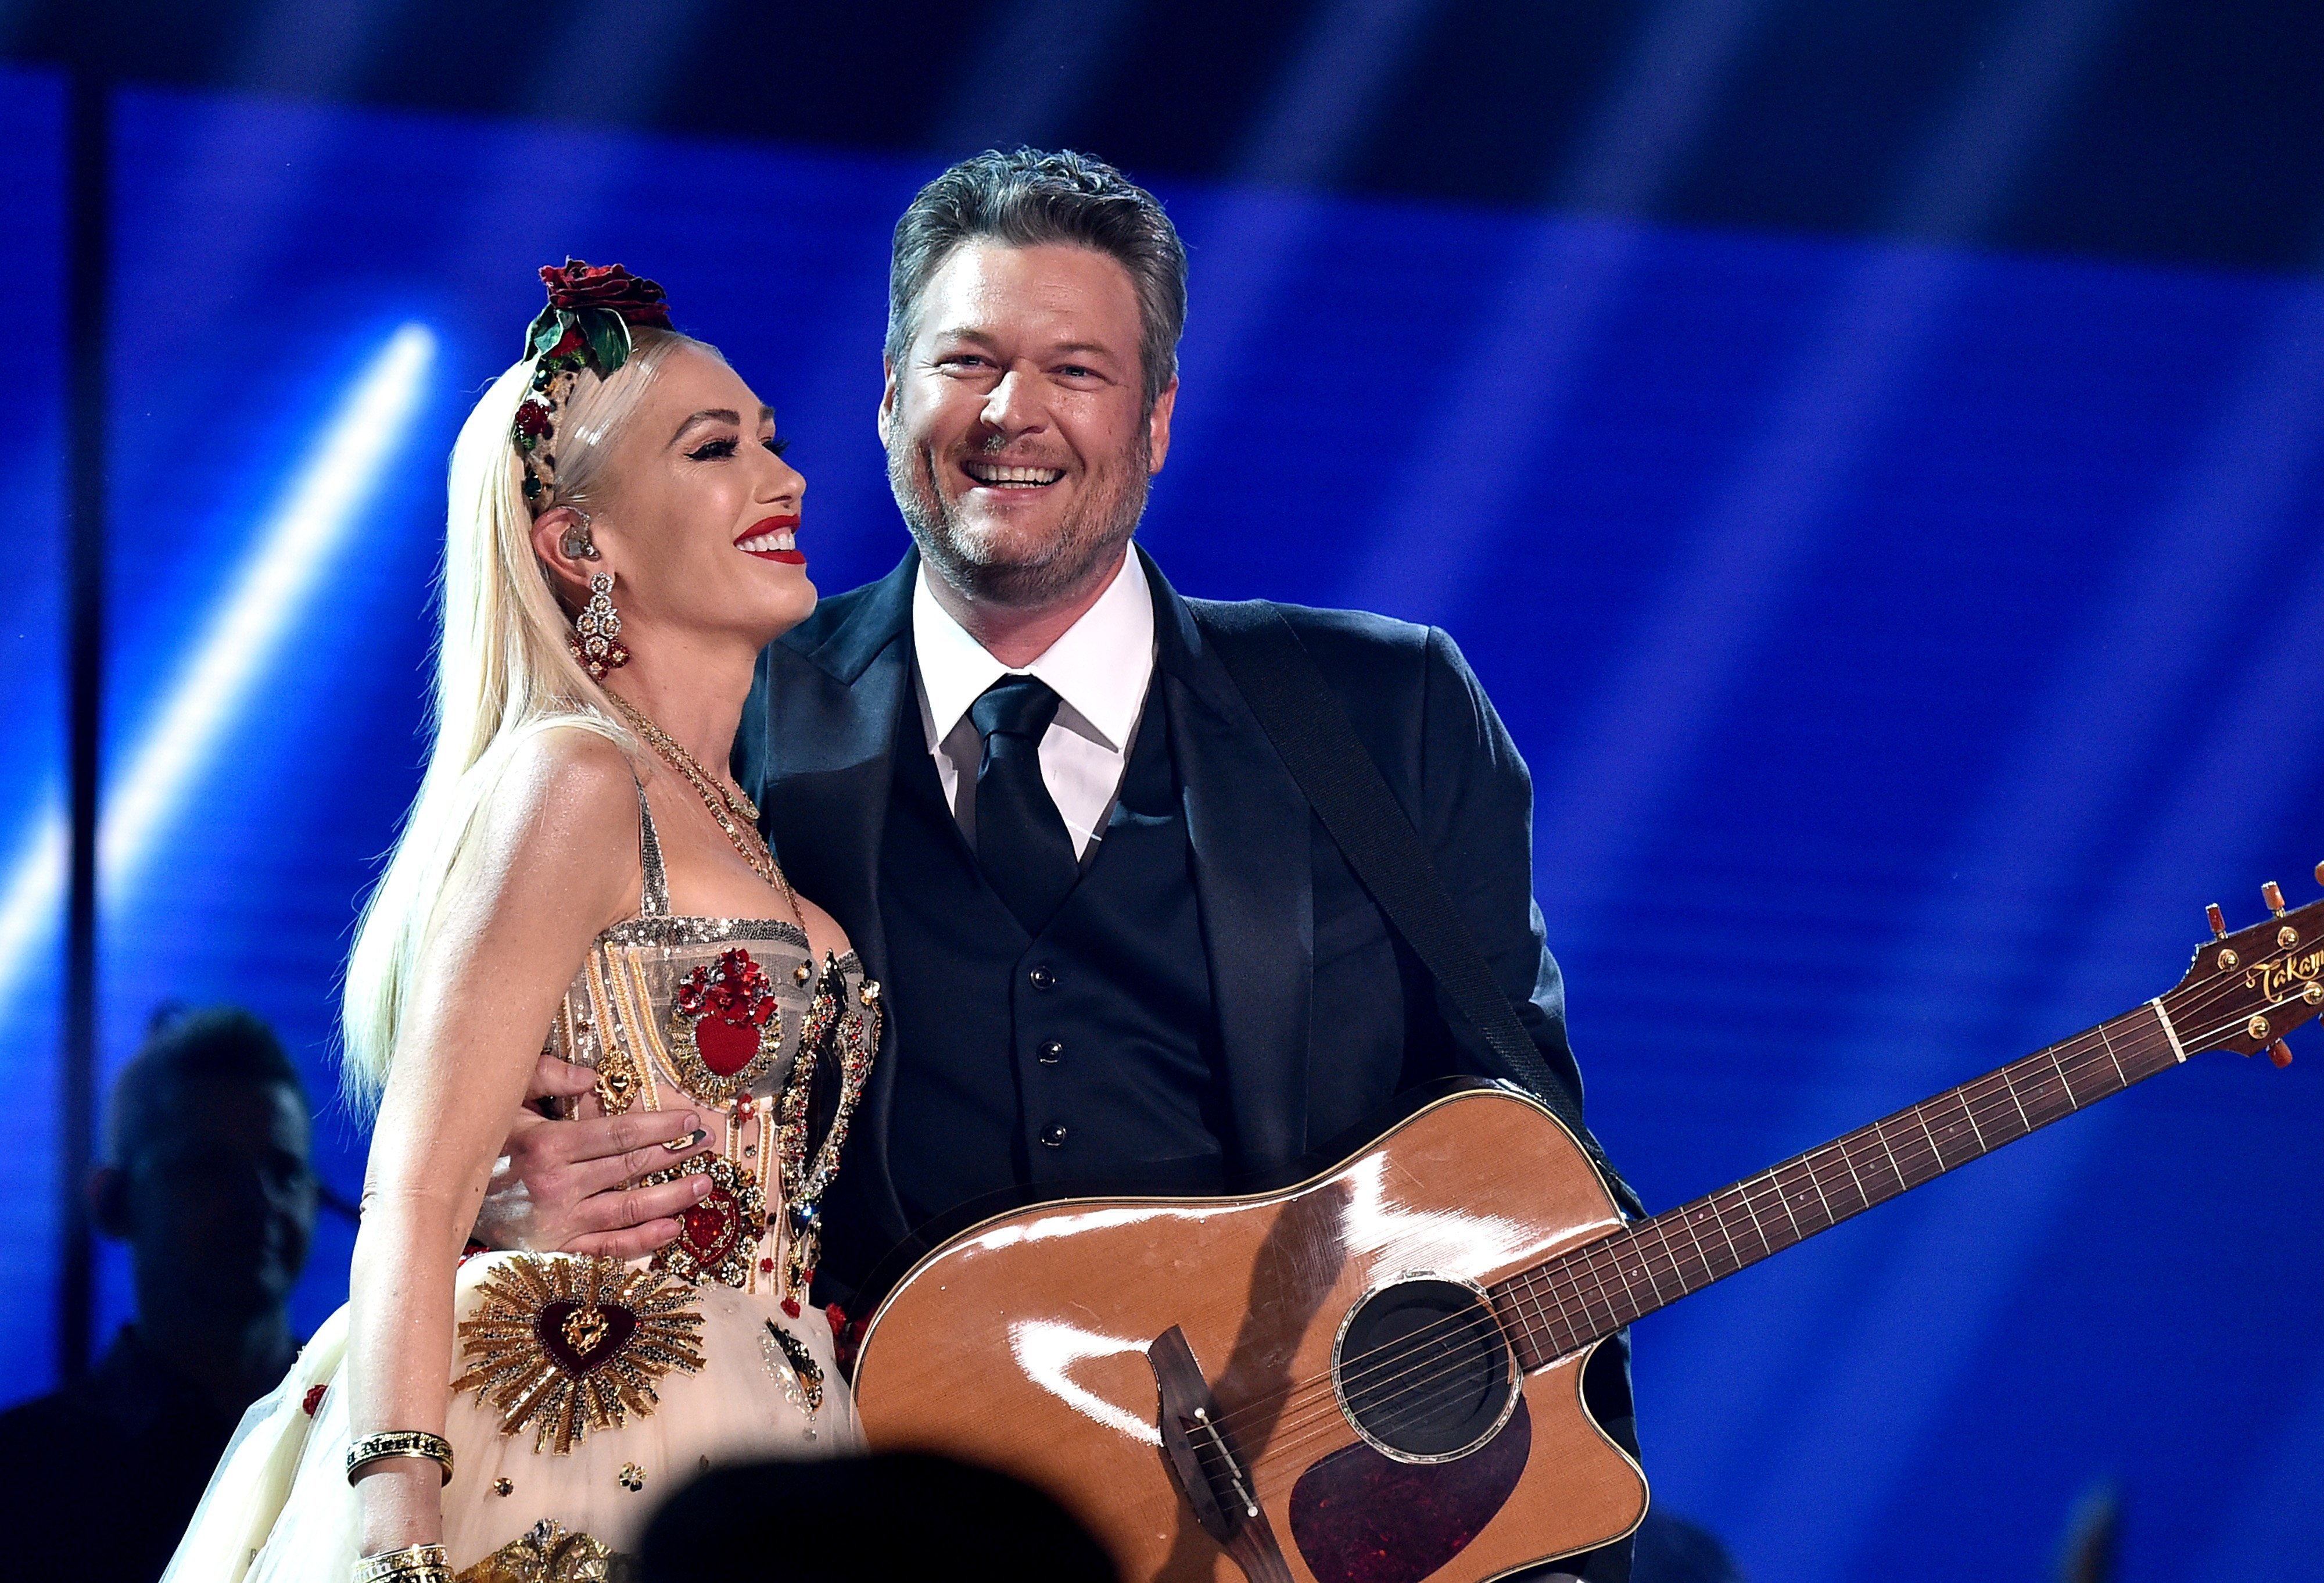 Gwen Stefani (L) and Blake Shelton perform at the 62nd Annual GRAMMY Awards on January 26, 2020 | Photo: GettyImages